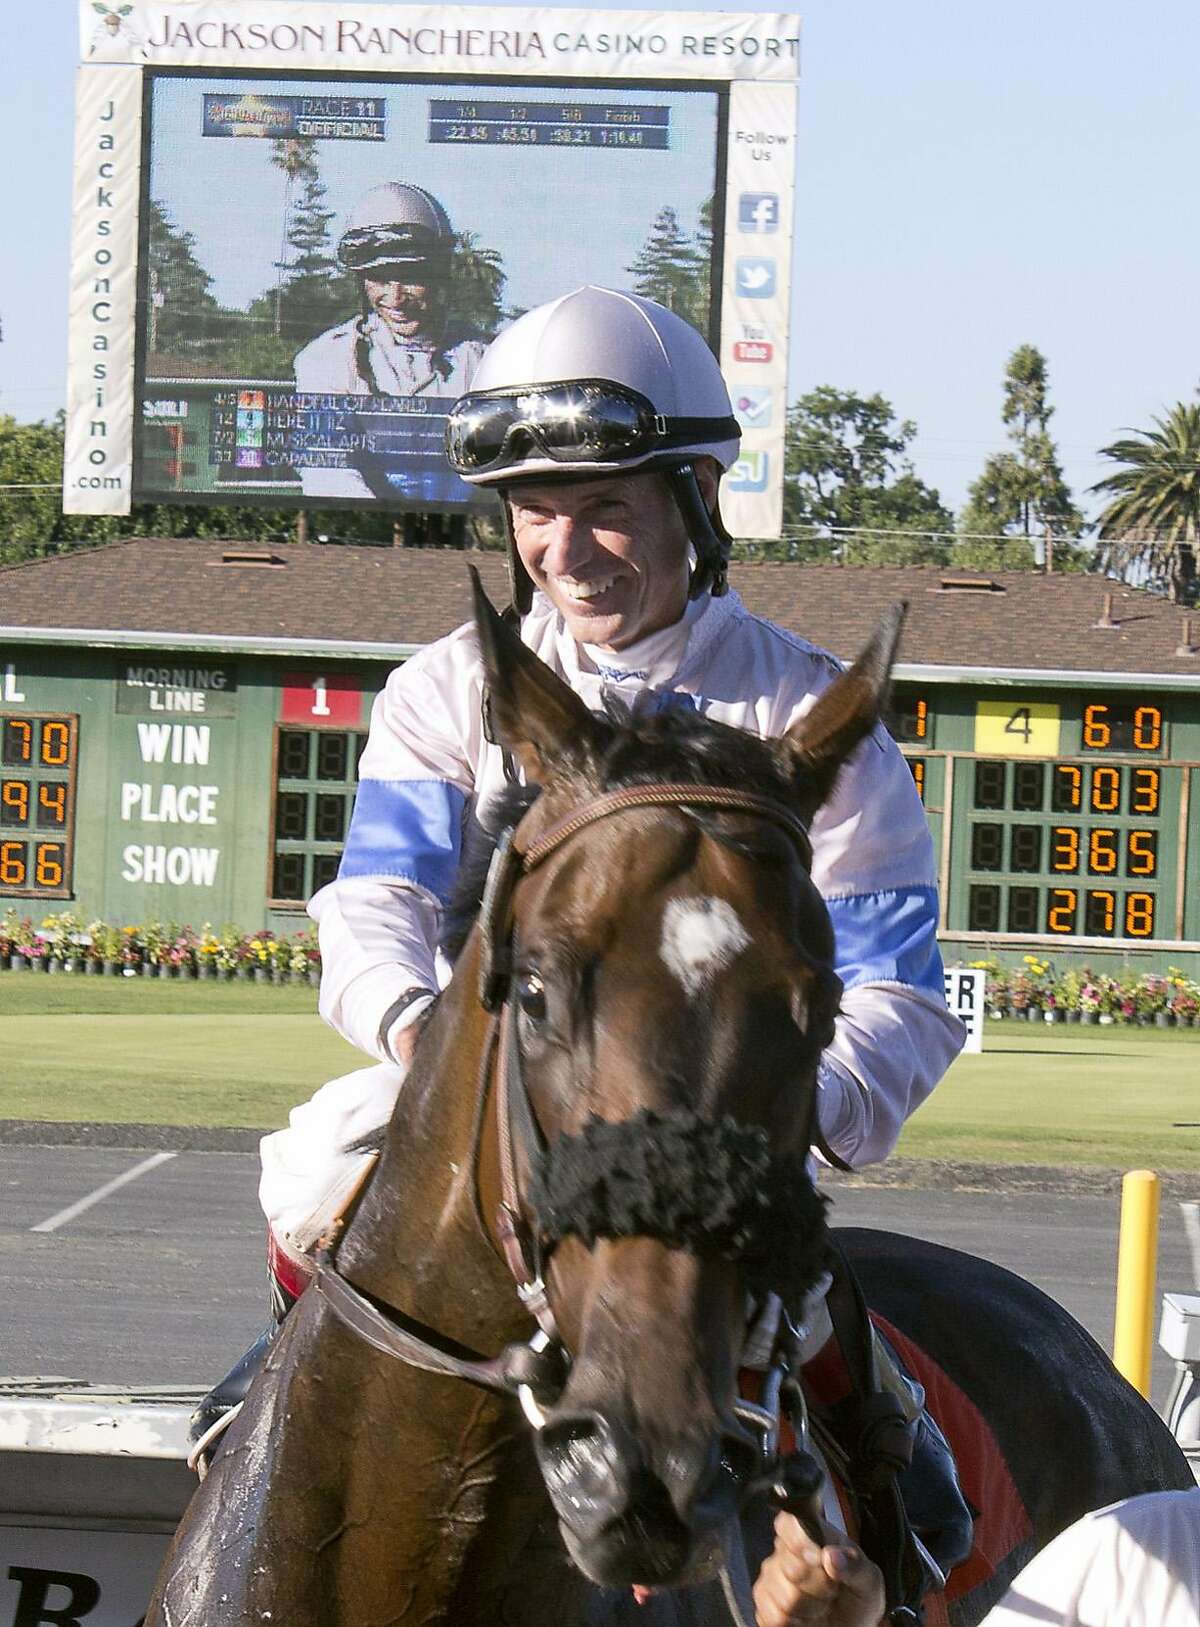 Russell Baze rode "Handful of Pearls" for his 12,000th win in the 11th race at the Alameda County Fairgounds on July 7th, 2013 in Pleasanton, Calif.